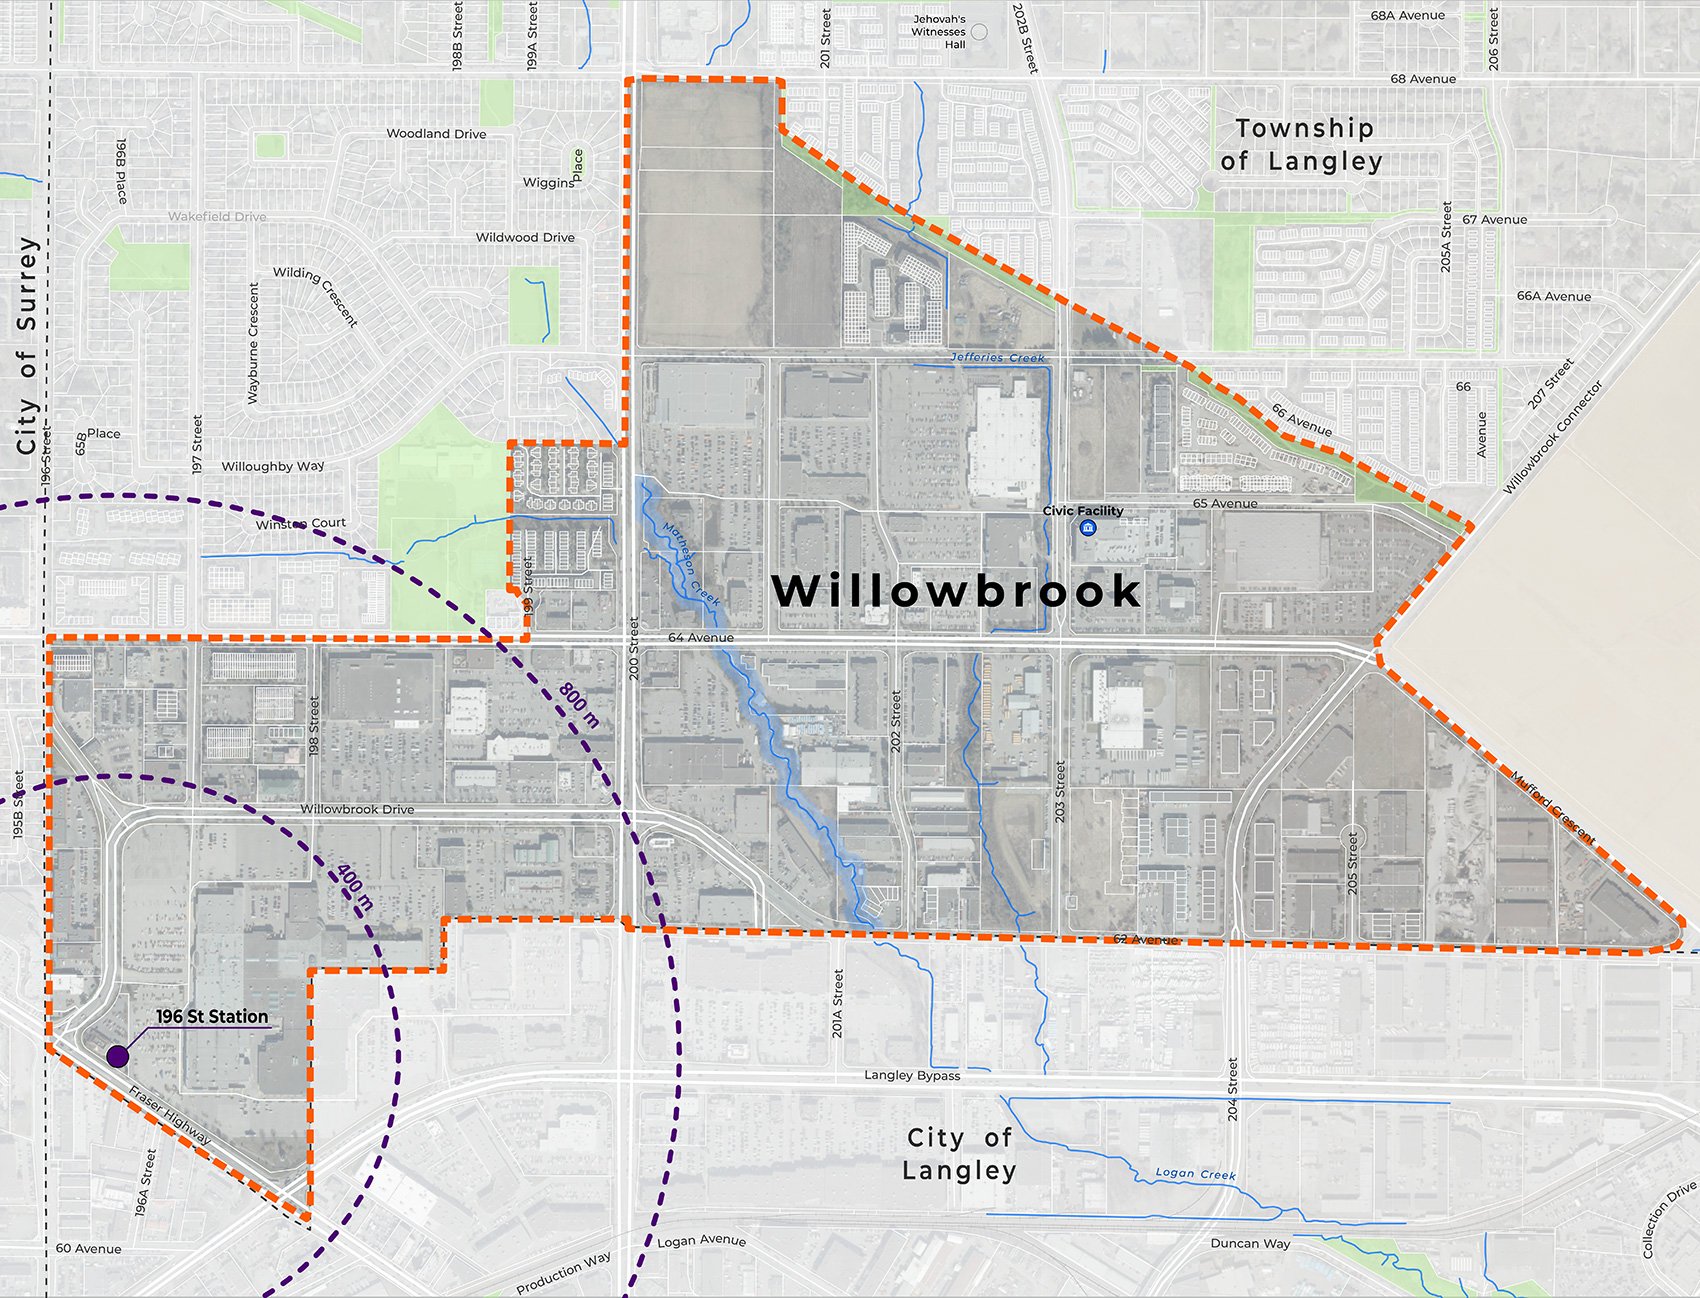 Willowbrook plan area map courtesy of the Township of Langley.